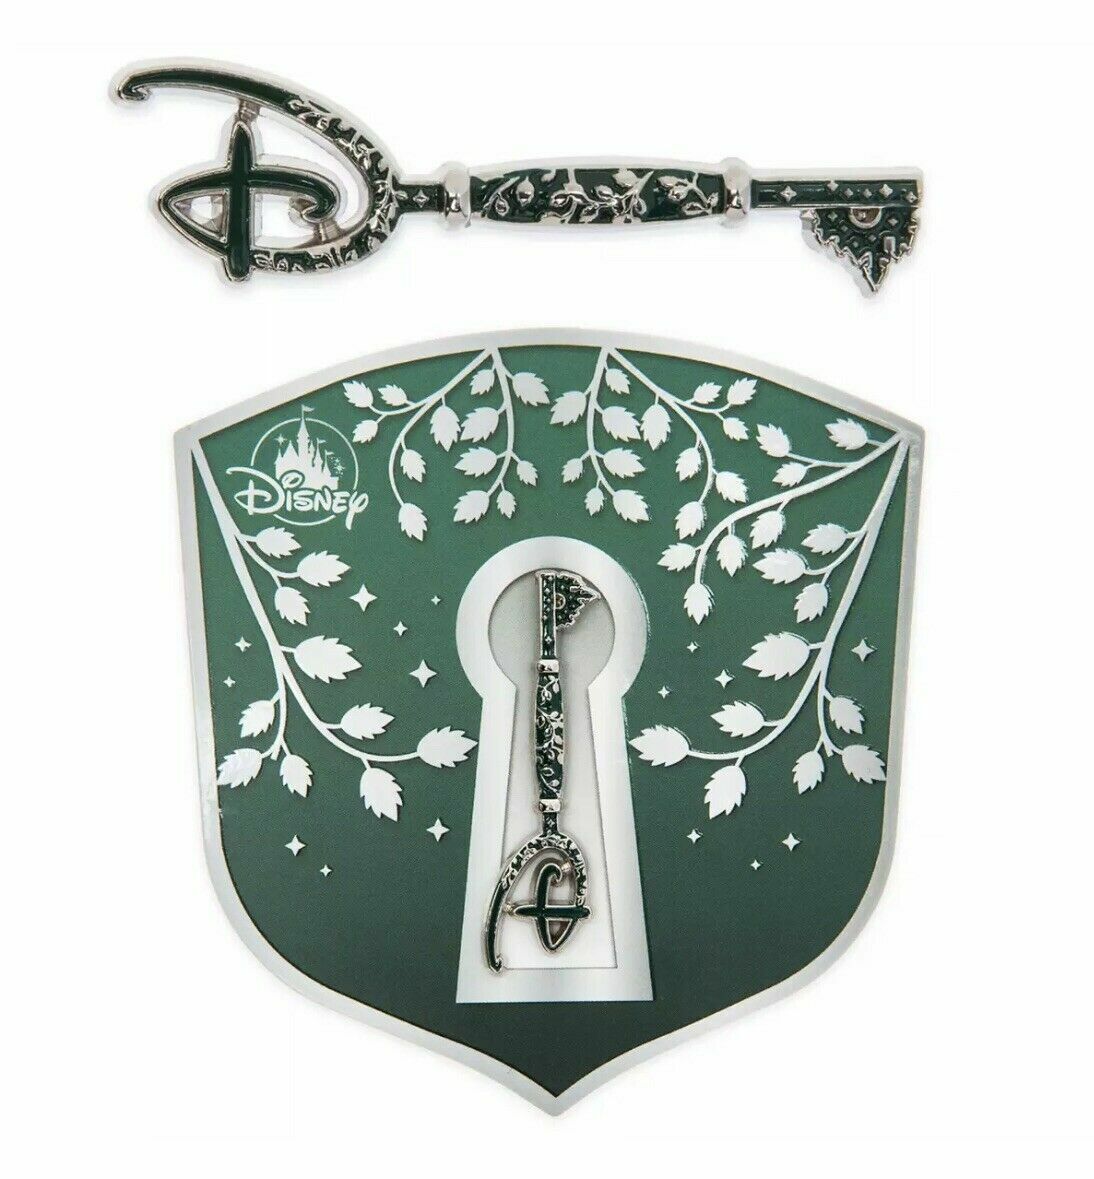 Disney Store 2020 Opening Ceremony Key Pin New with Card